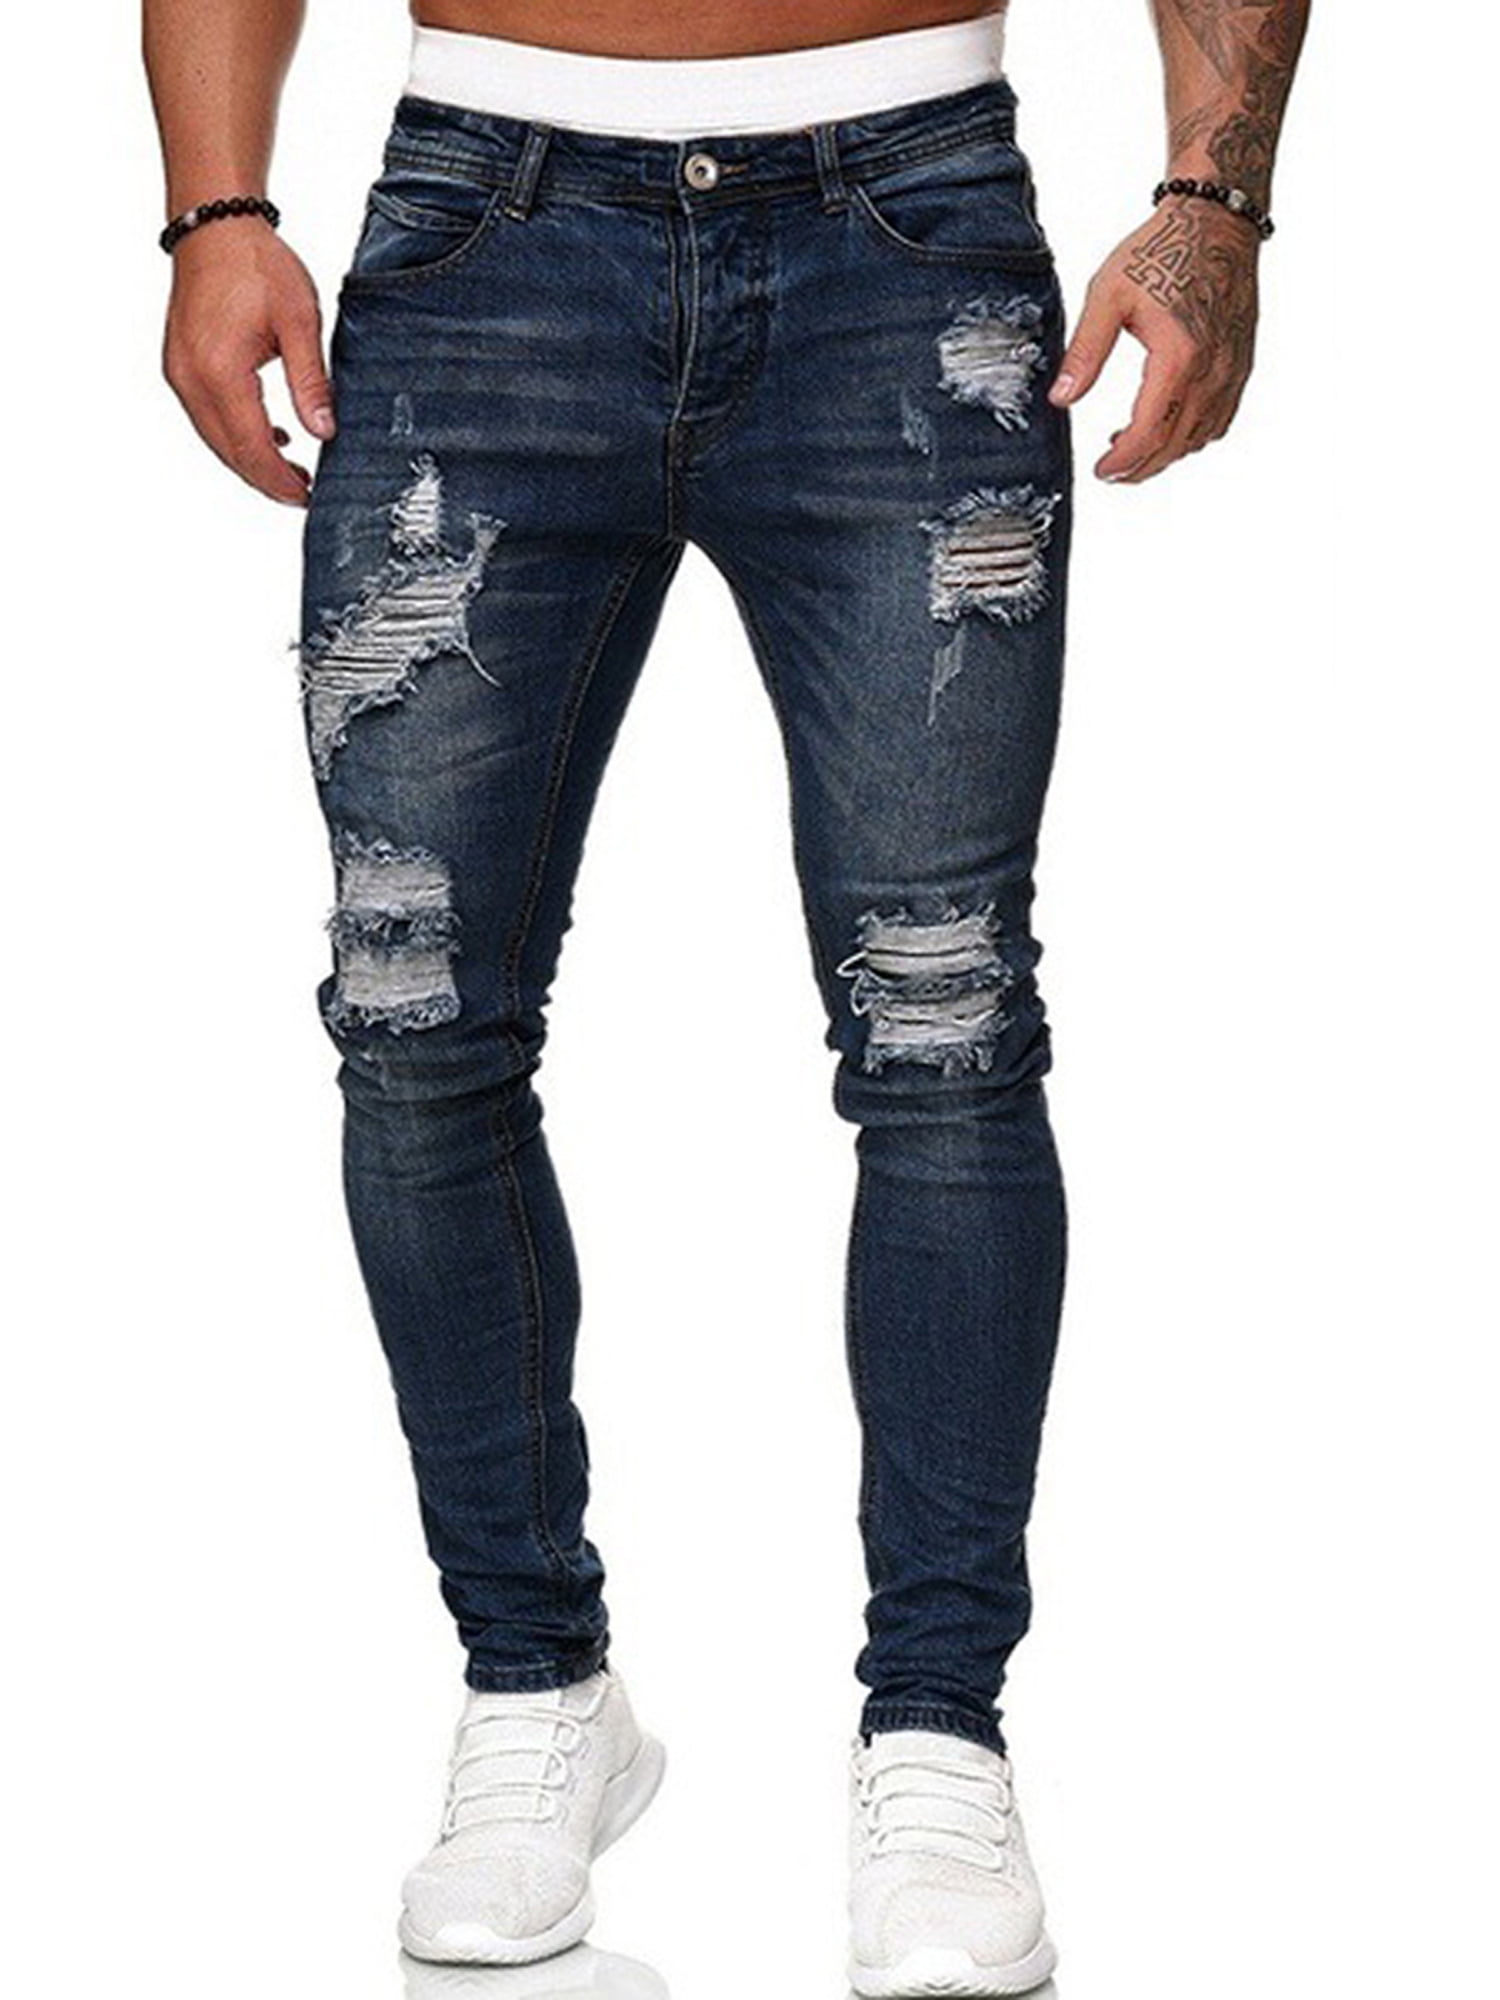 YKARITIANNA Mens Swaggy Destroyed Taped Slim Fit Denim Pants Stretchy Ripped Skinny Biker Jeans Trousers